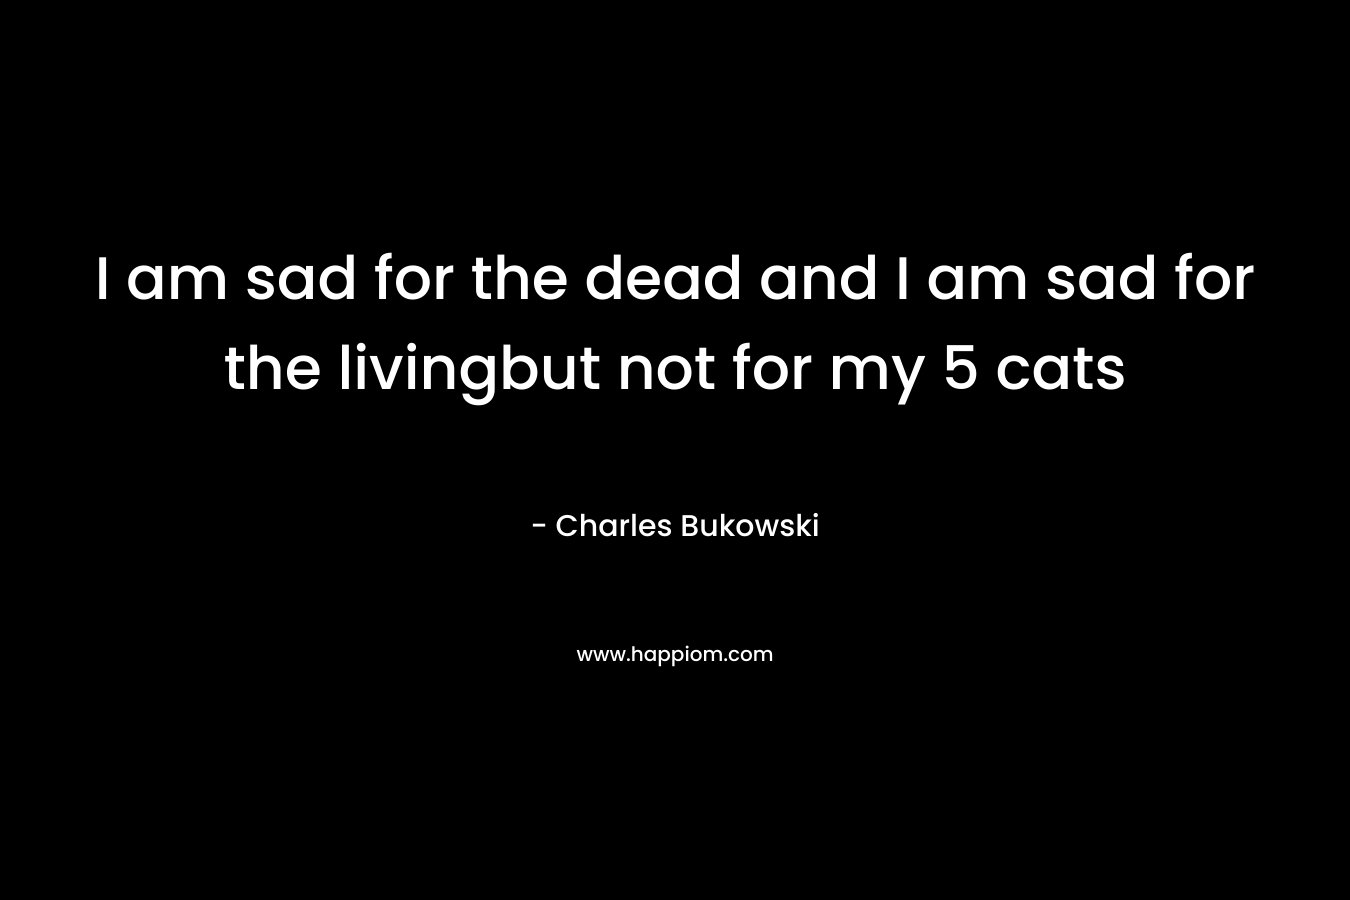 I am sad for the dead and I am sad for the livingbut not for my 5 cats – Charles Bukowski